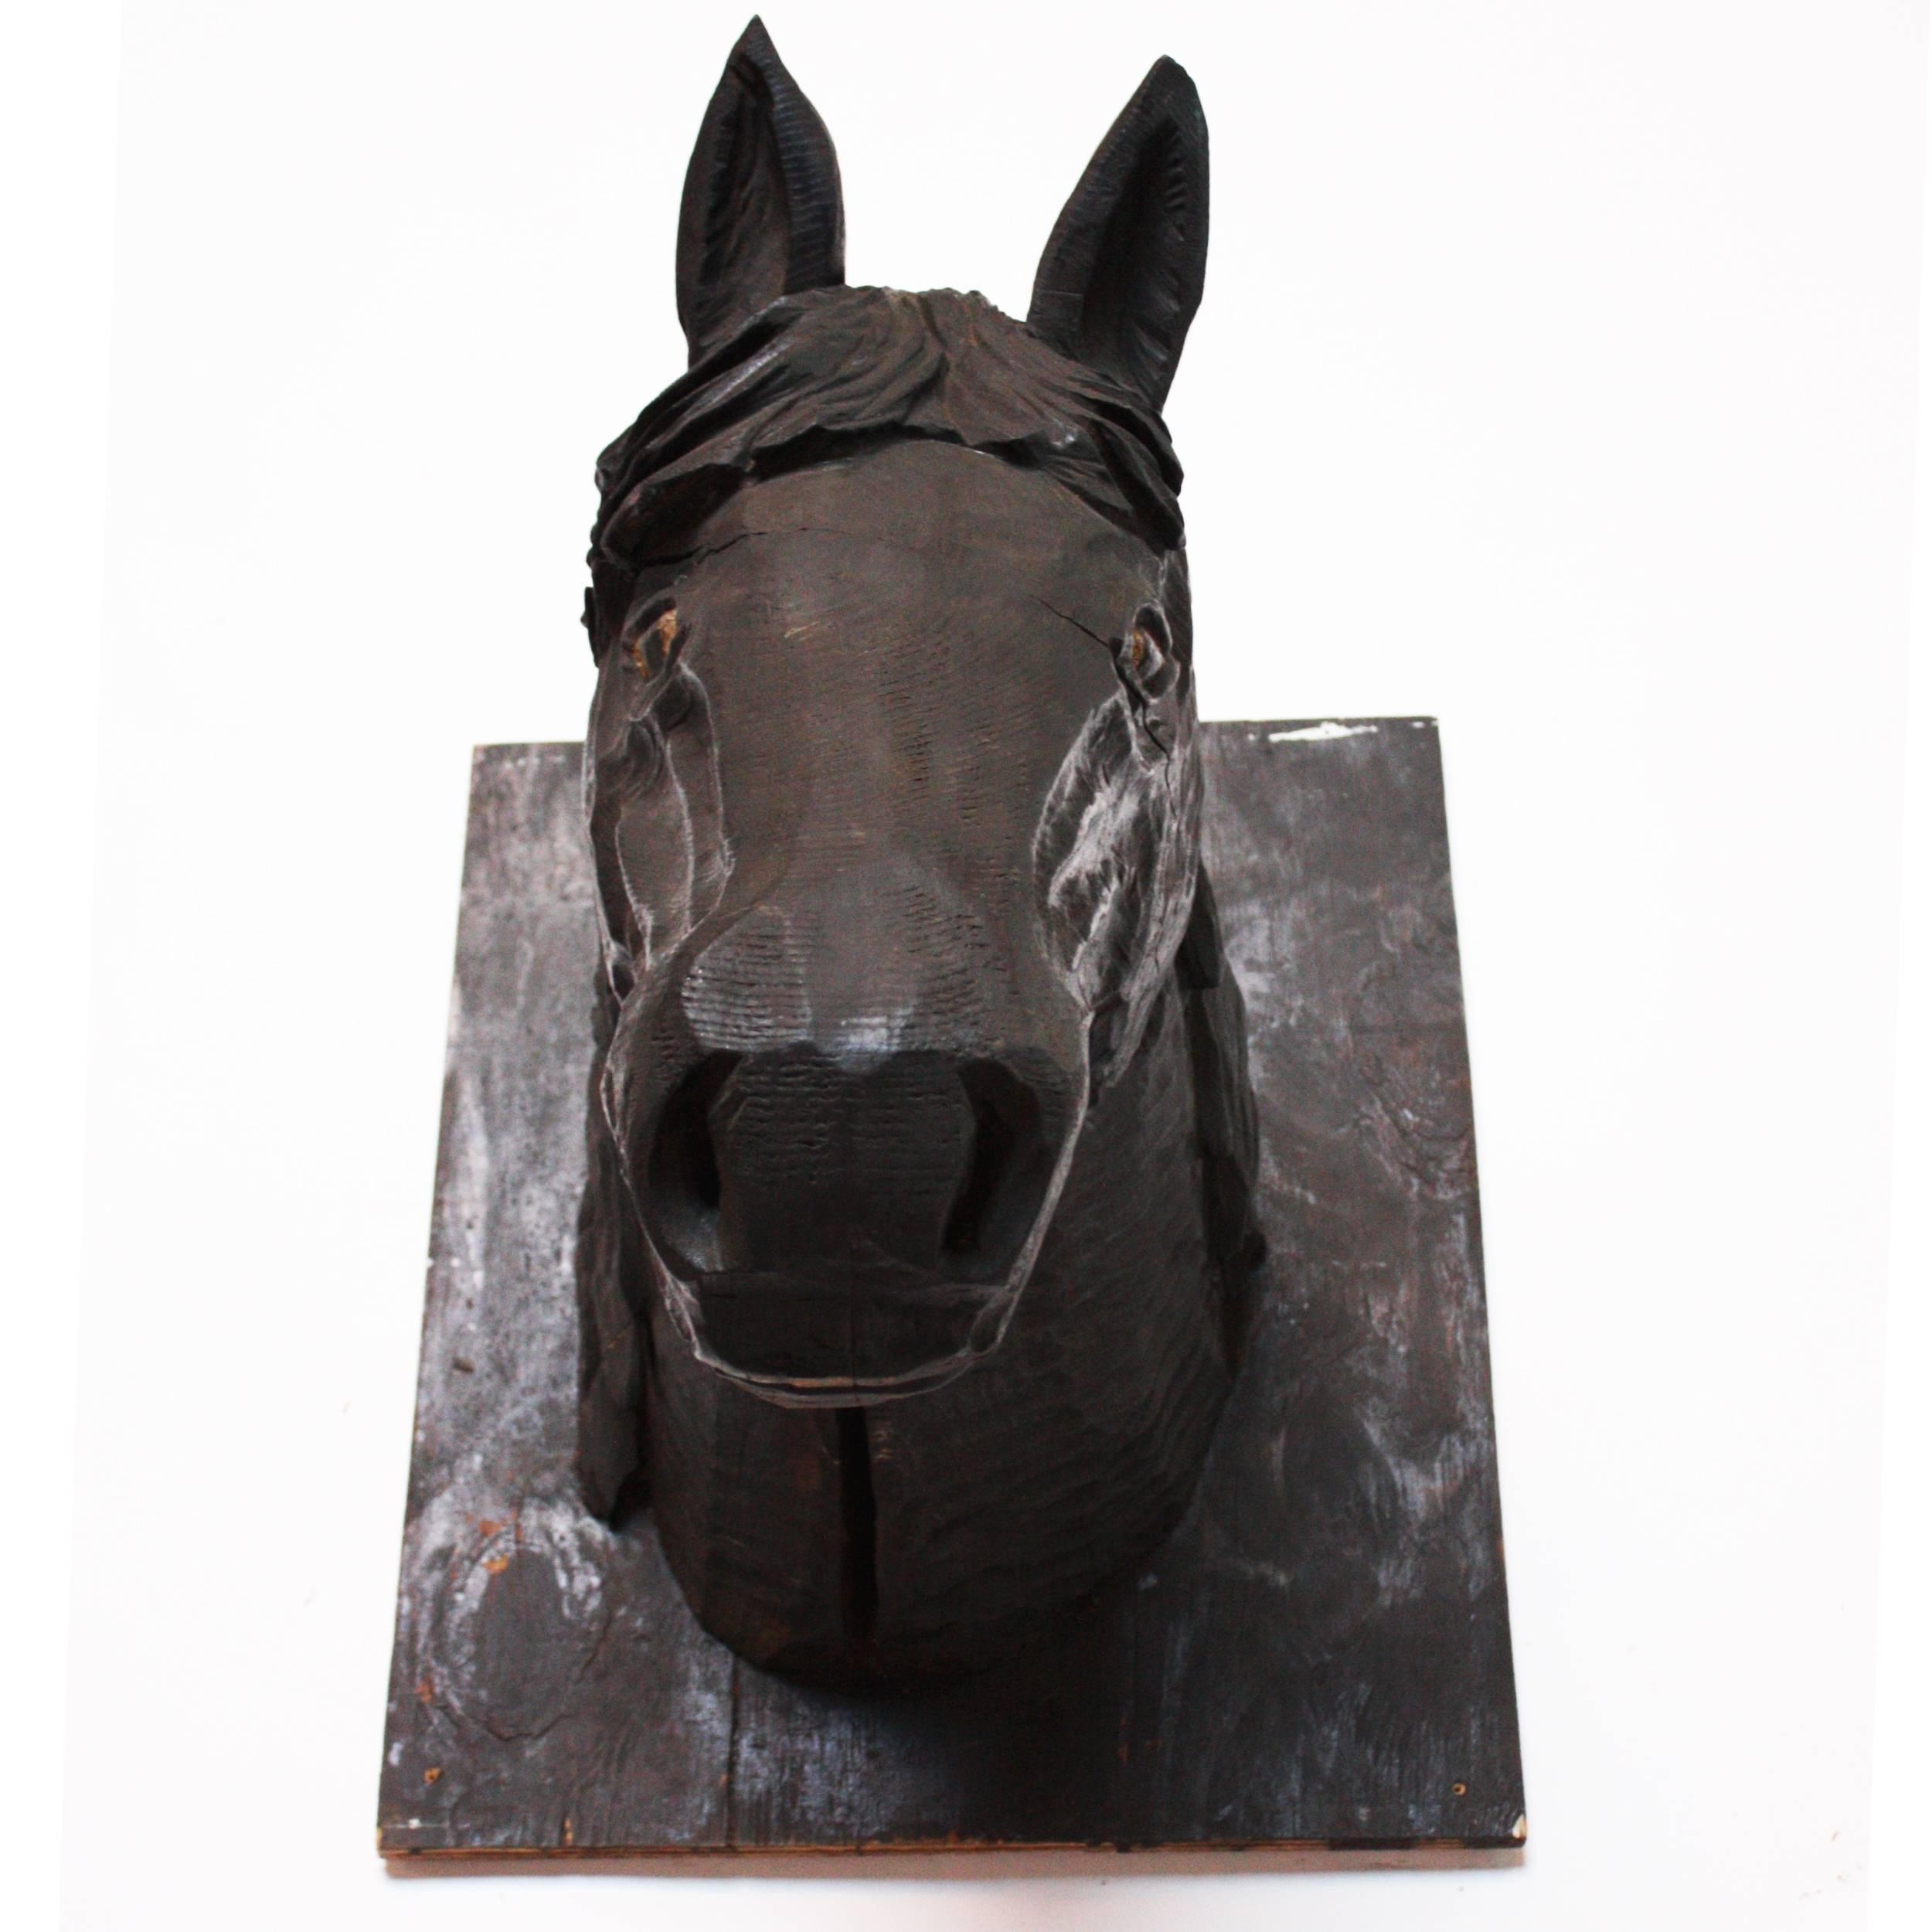 This interesting hand-carved horse advertising piece was commissioned sometime in the mid-20th century for a New England dining establishment. However, and for reasons unknown to us, the business never opened and, as a result, this folk relic ended